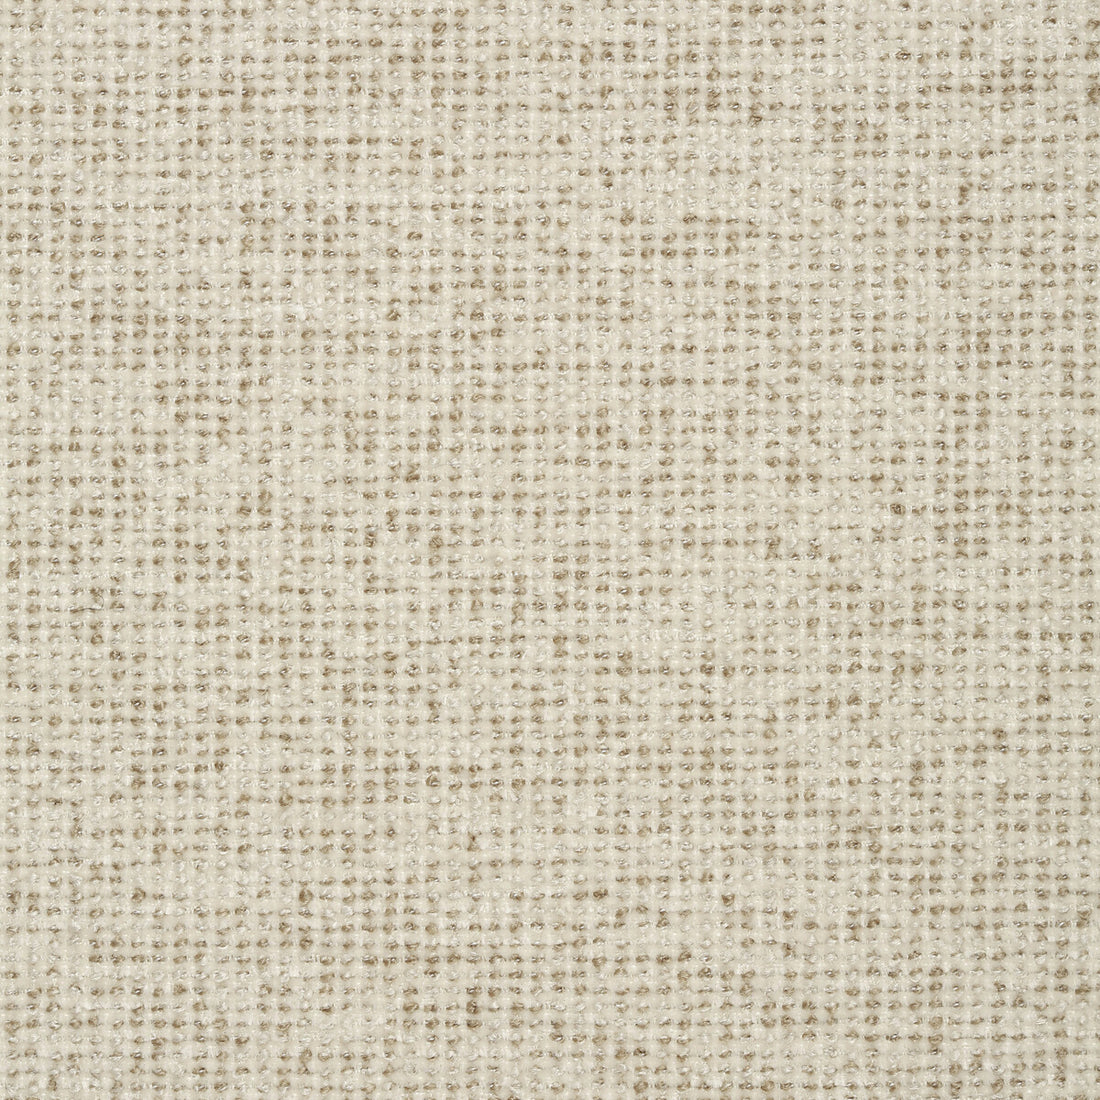 Kravet Contract fabric in 35116-116 color - pattern 35116.116.0 - by Kravet Contract in the Crypton Incase collection